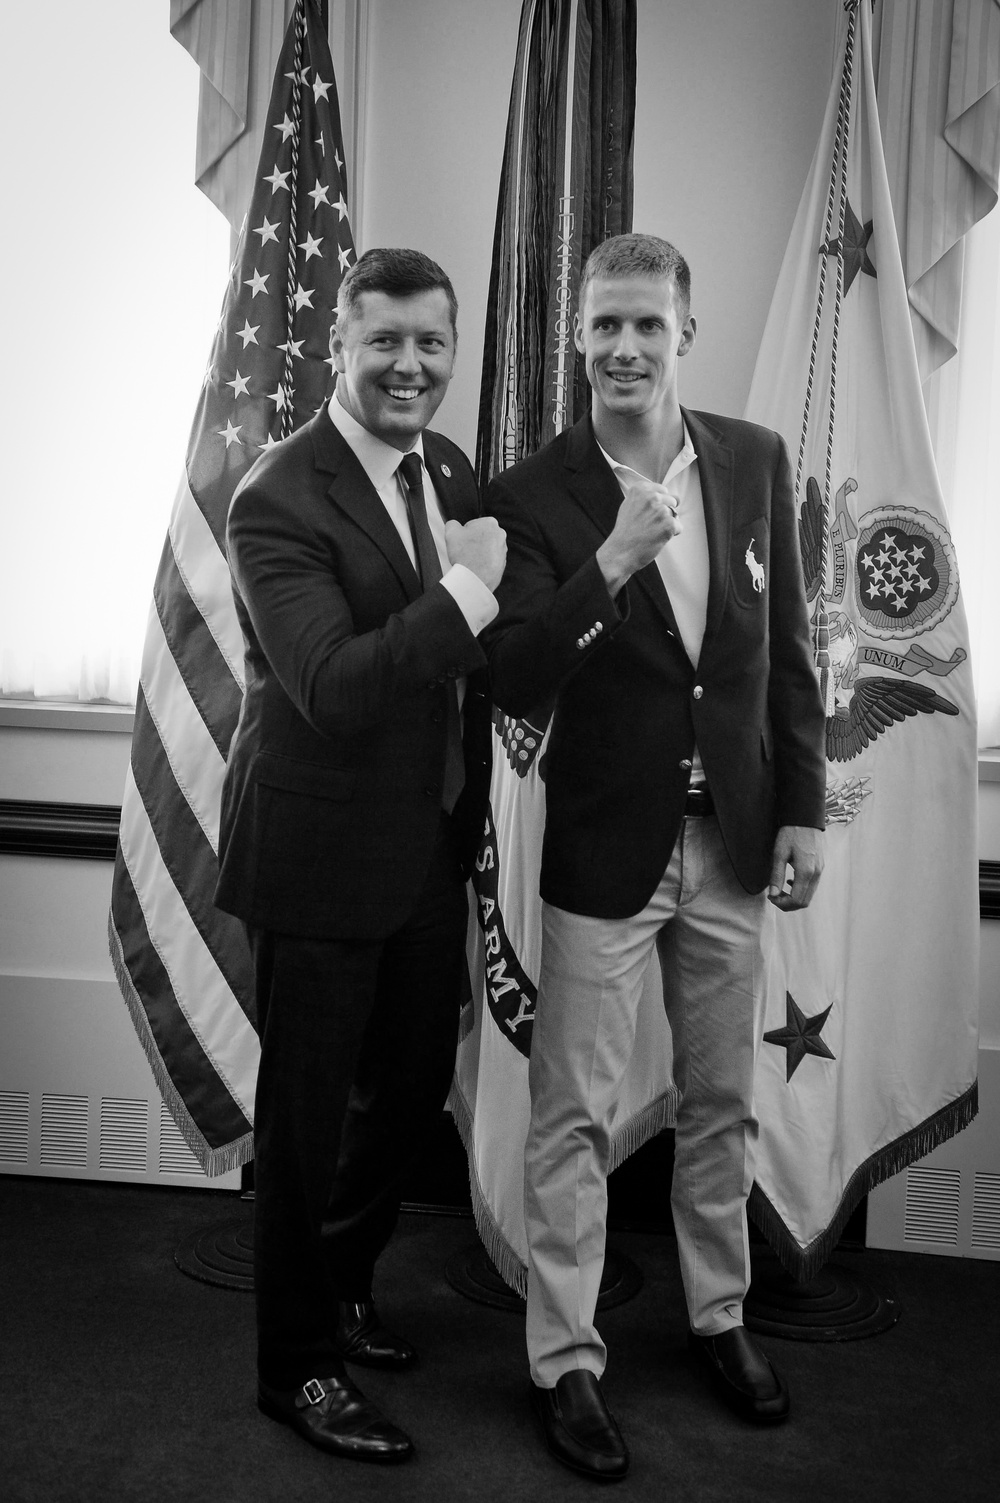 The Under Secretary of the Army Patrick Murphy hosts office call with Olympian